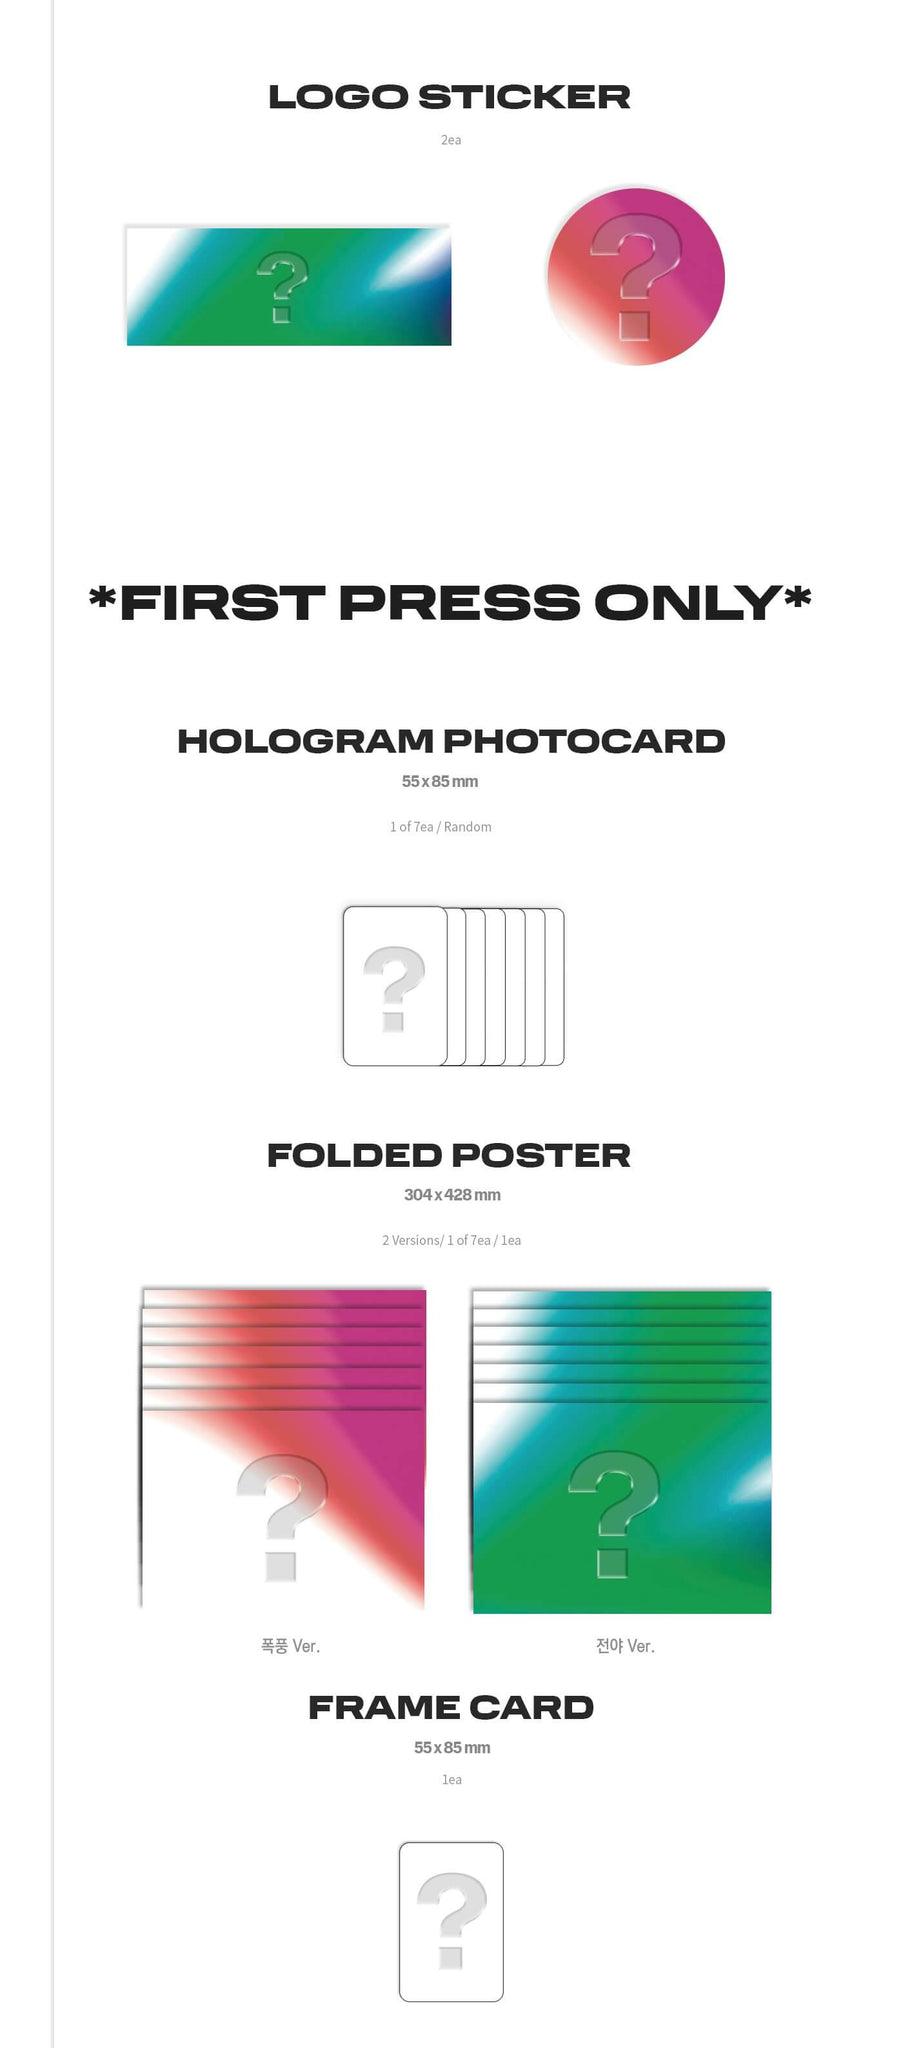 TEMPEST The Calm Before The Storm Inclusions Logo Sticker 1st Press Only Hologram Photocard Folded Poster Frame Card